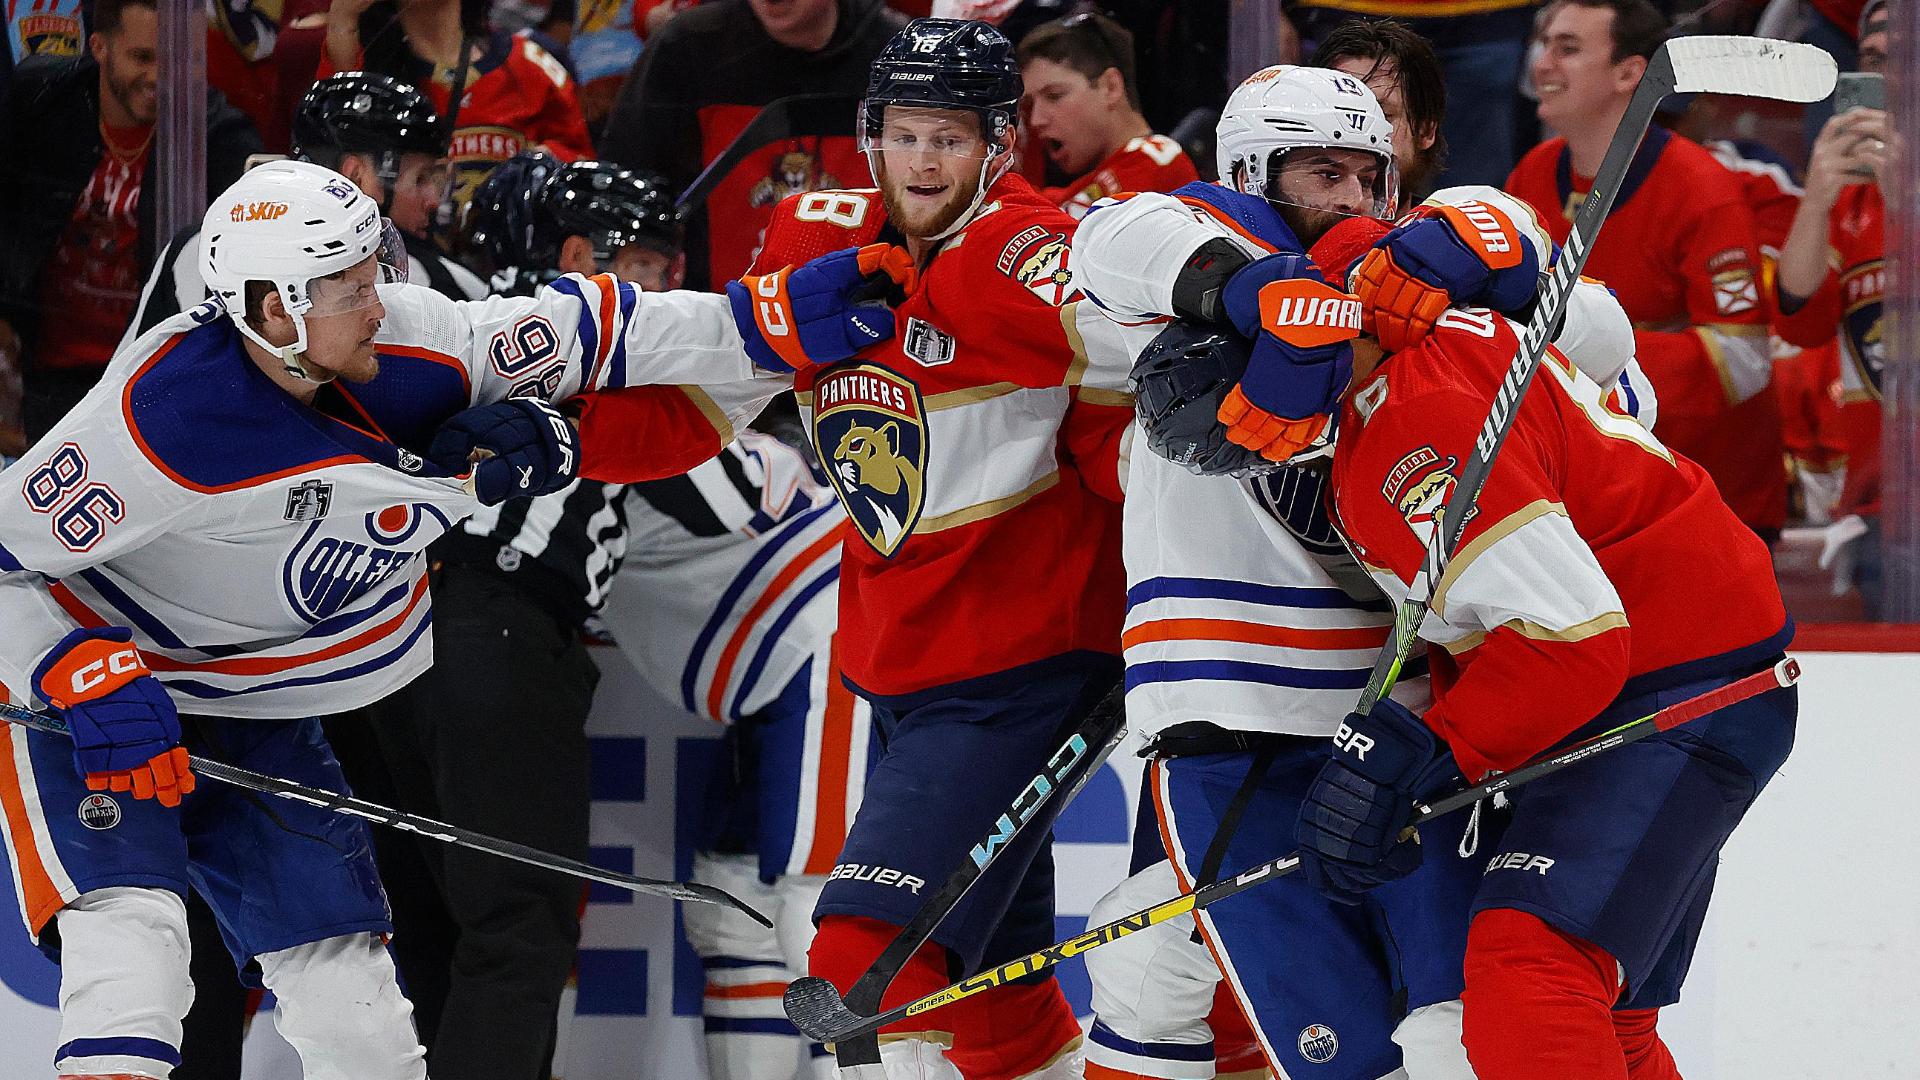 Scuffle breaks out after post-whistle shot from Oilers